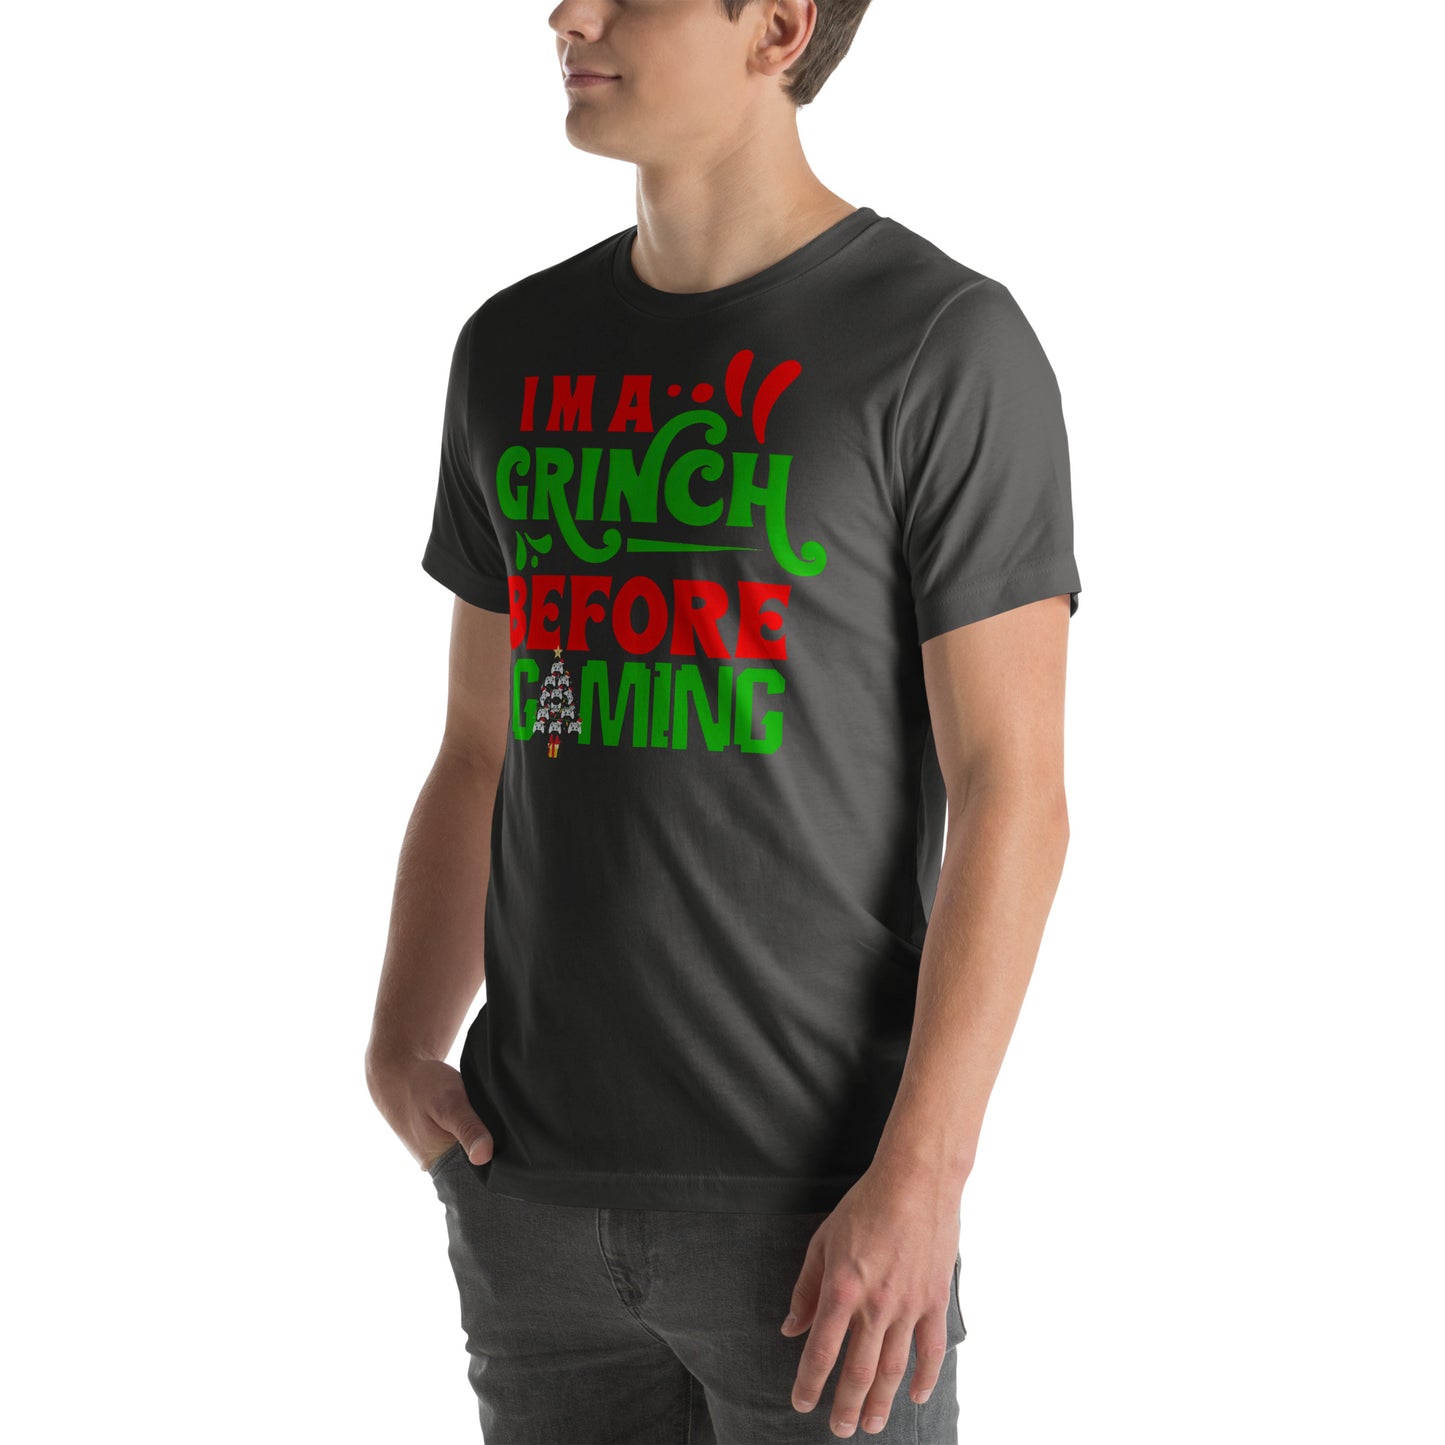 I'm a Grinch Before Gaming | Unisex Casual Tee | Gamer Shirt